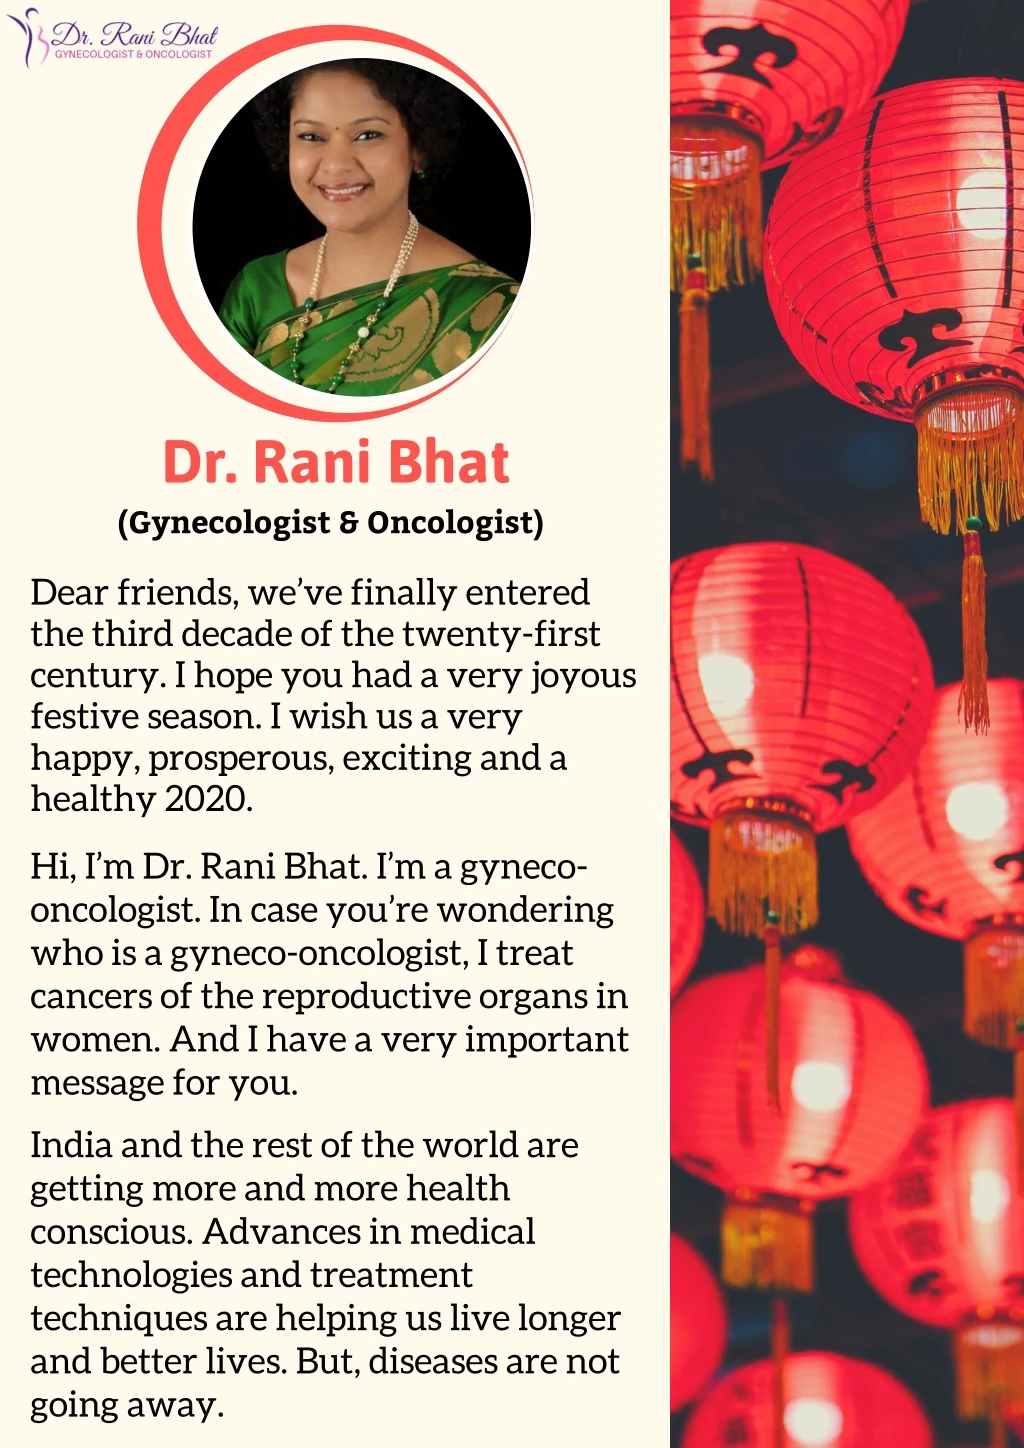 dr rani bhat gynecologist oncologist